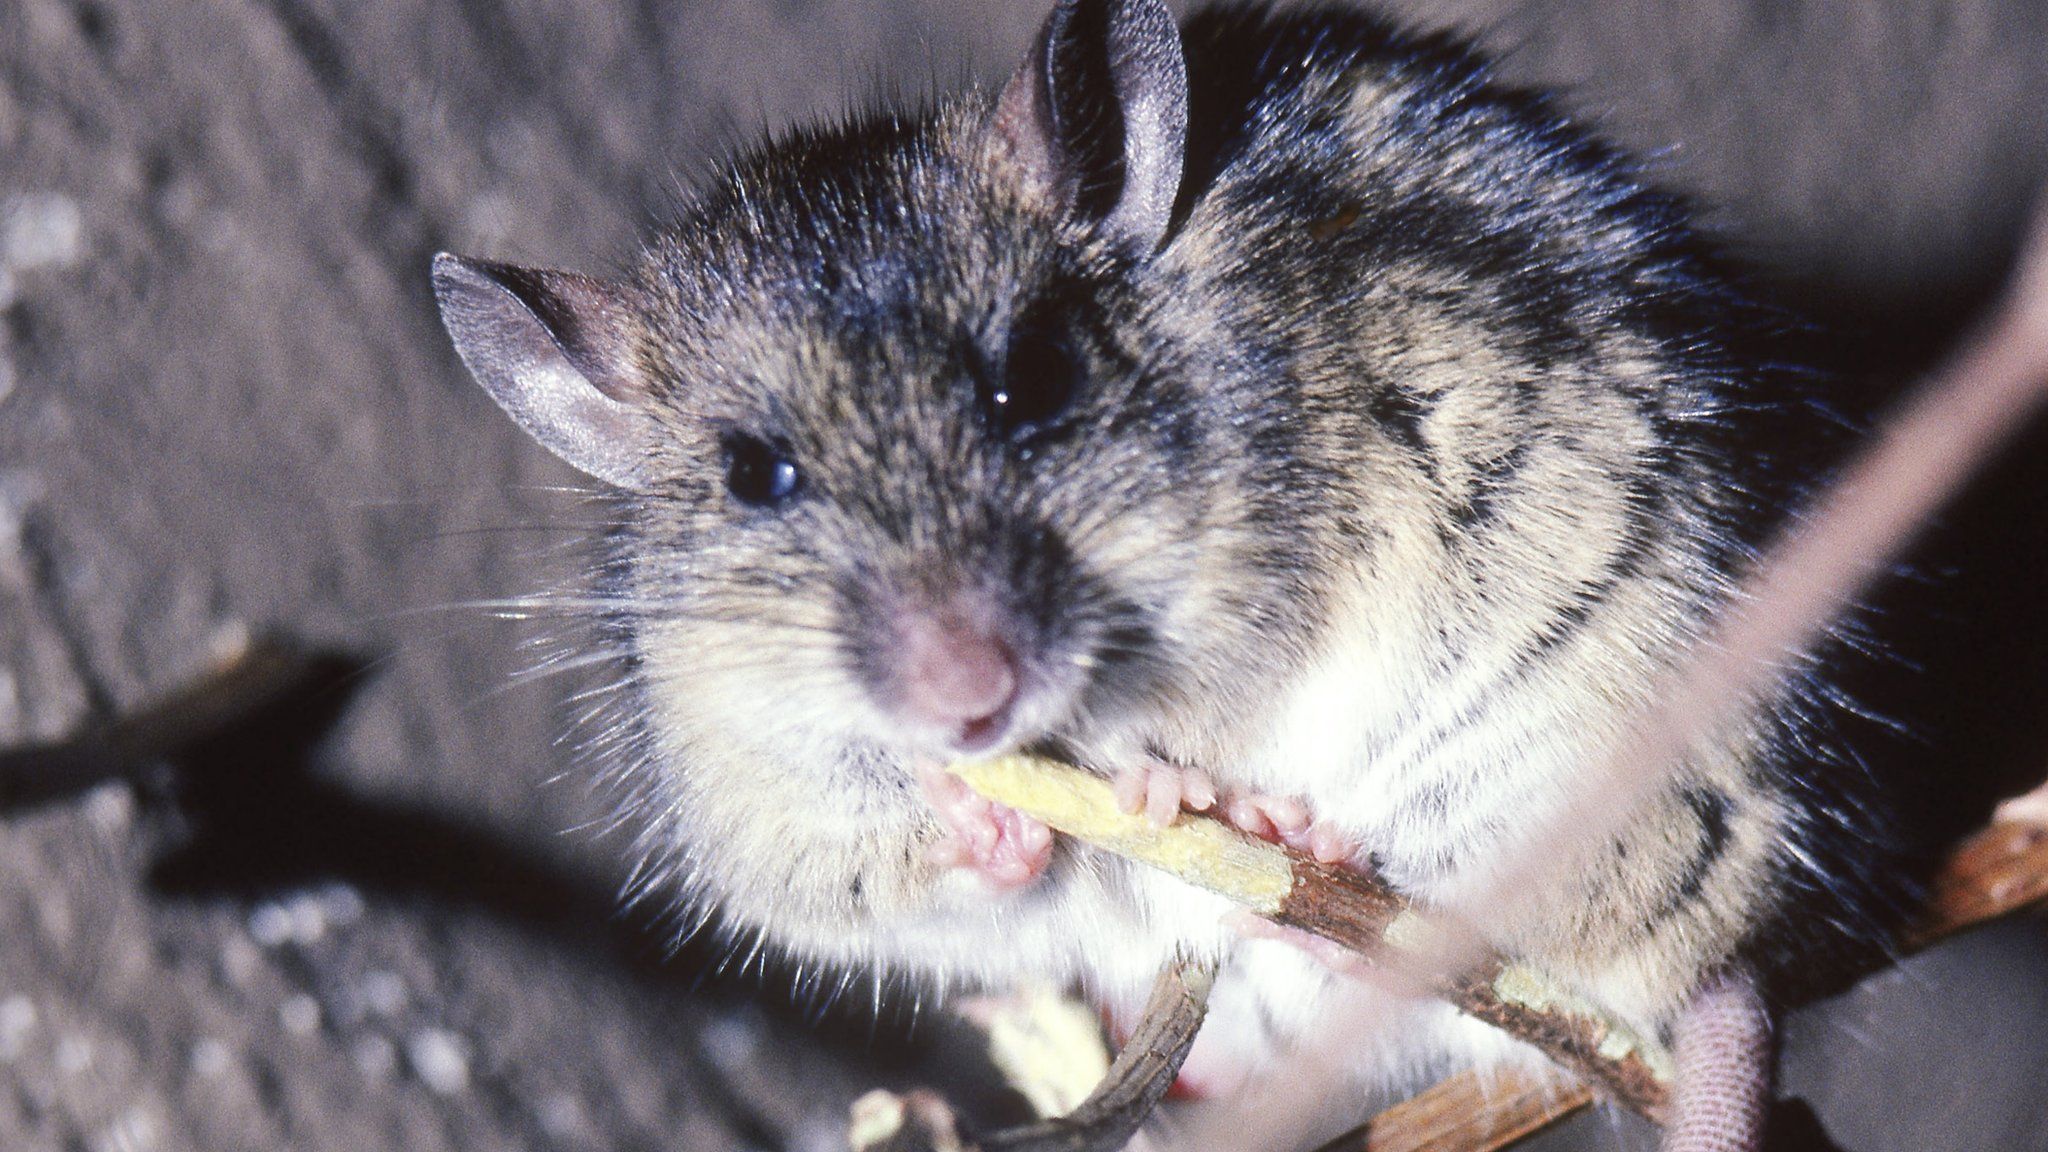 Rats spread a variety of diseases, including Lassa fever